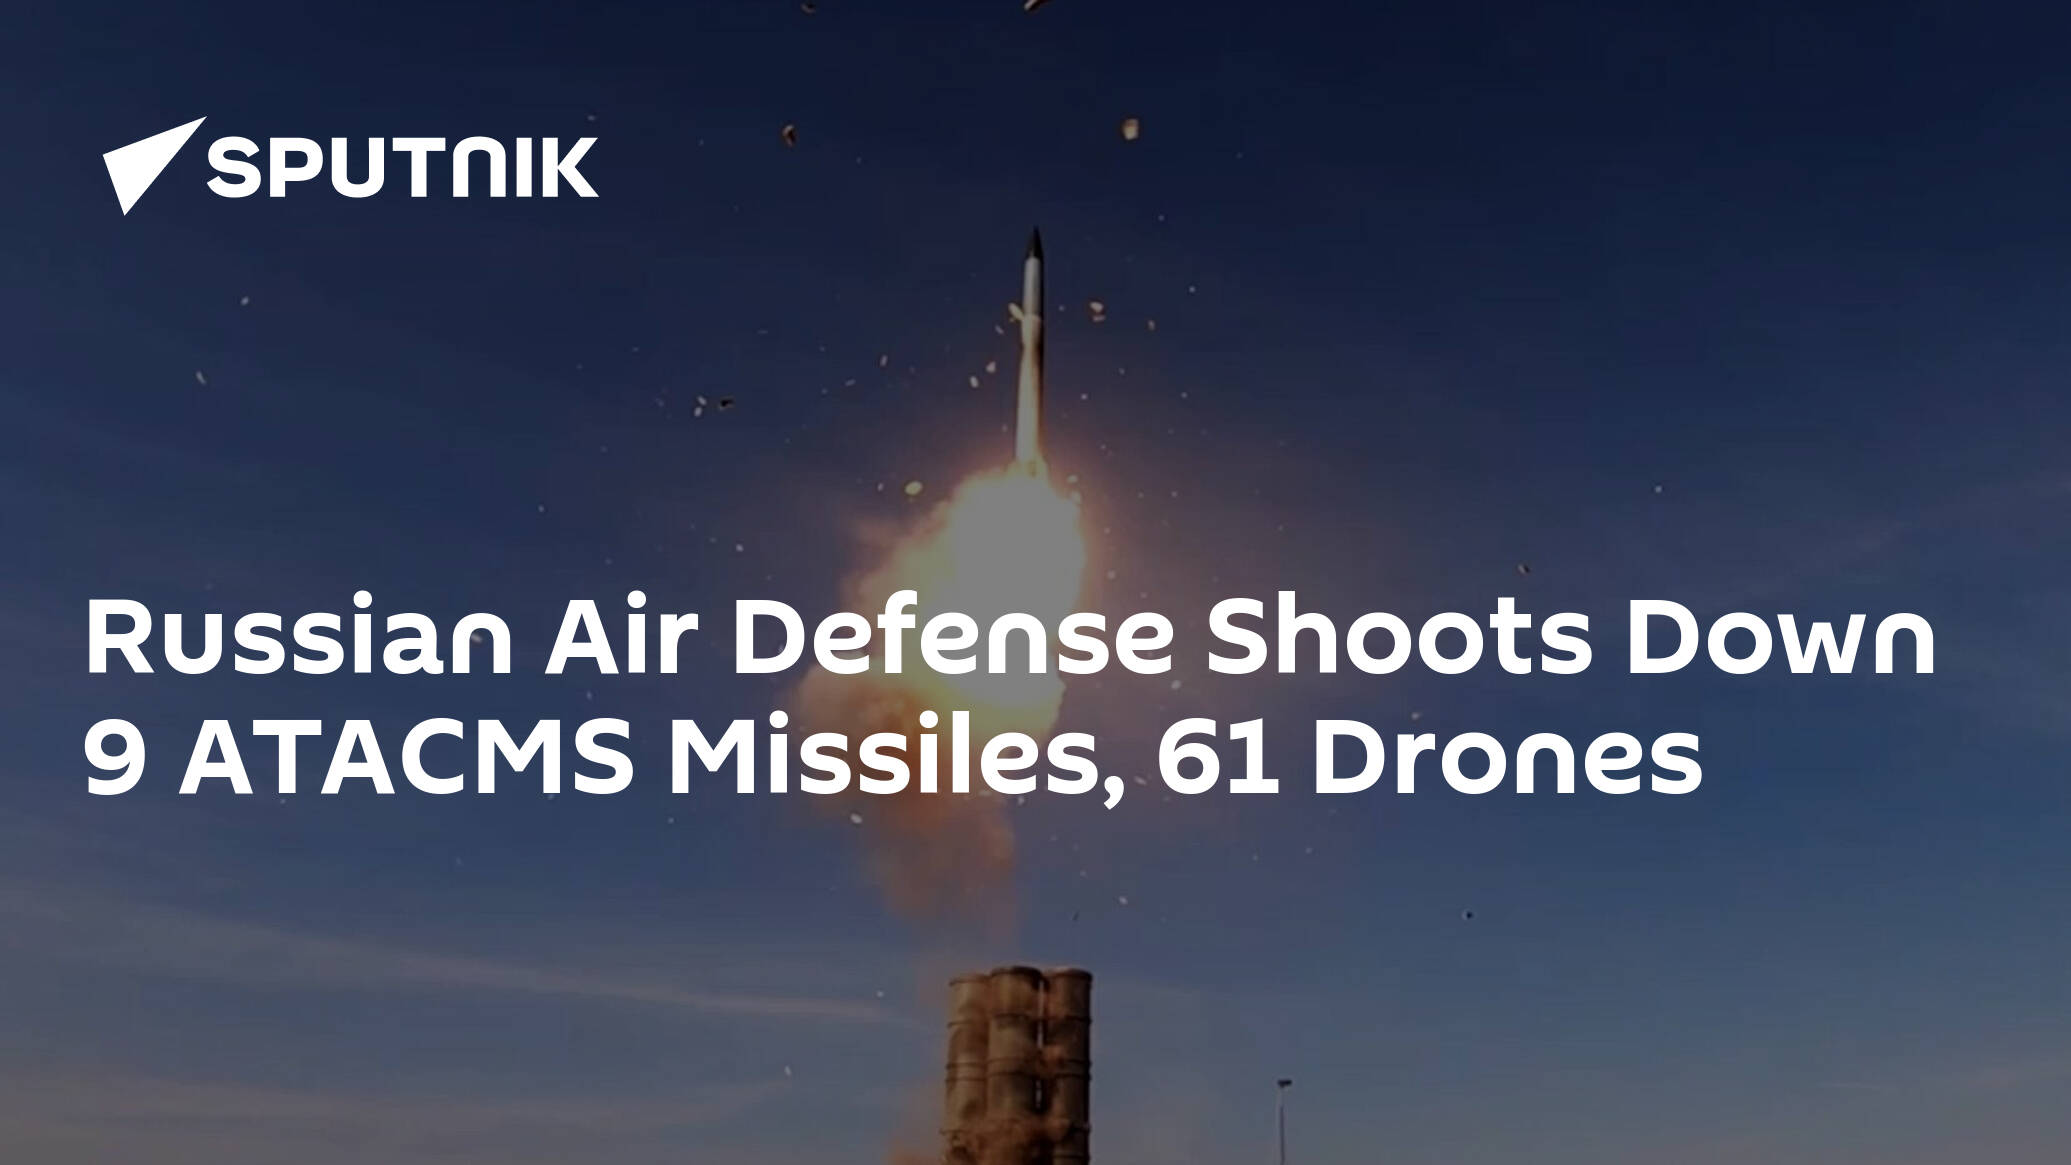 Russian Air Defense Shoots Down 9 ATACMS Missiles, 61 Drones